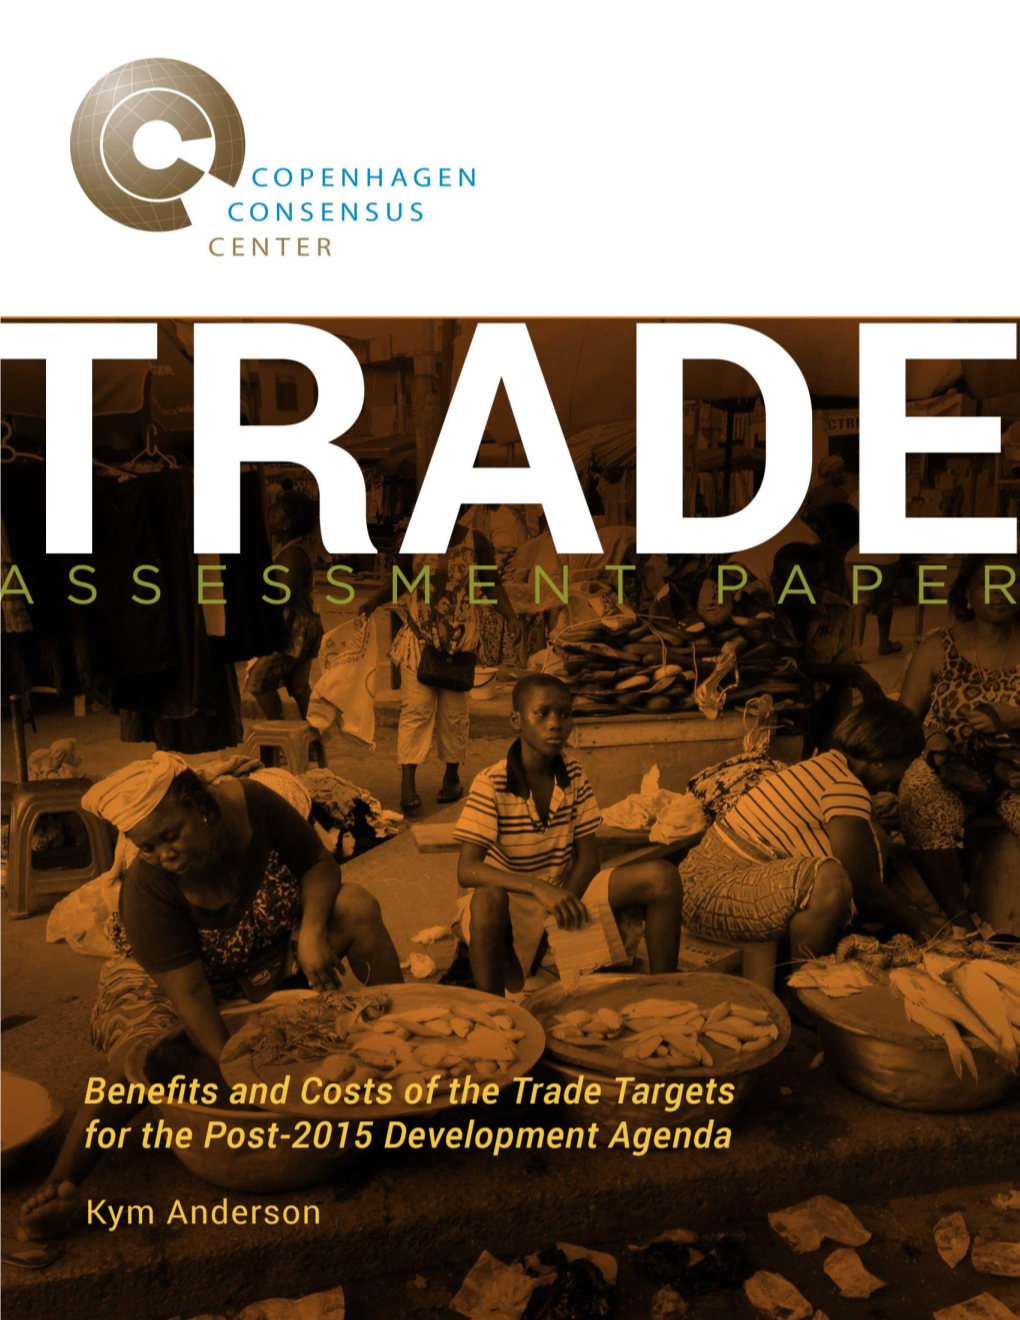 Benefits and Costs of the Trade Targets for the Post-2015 Development Agenda